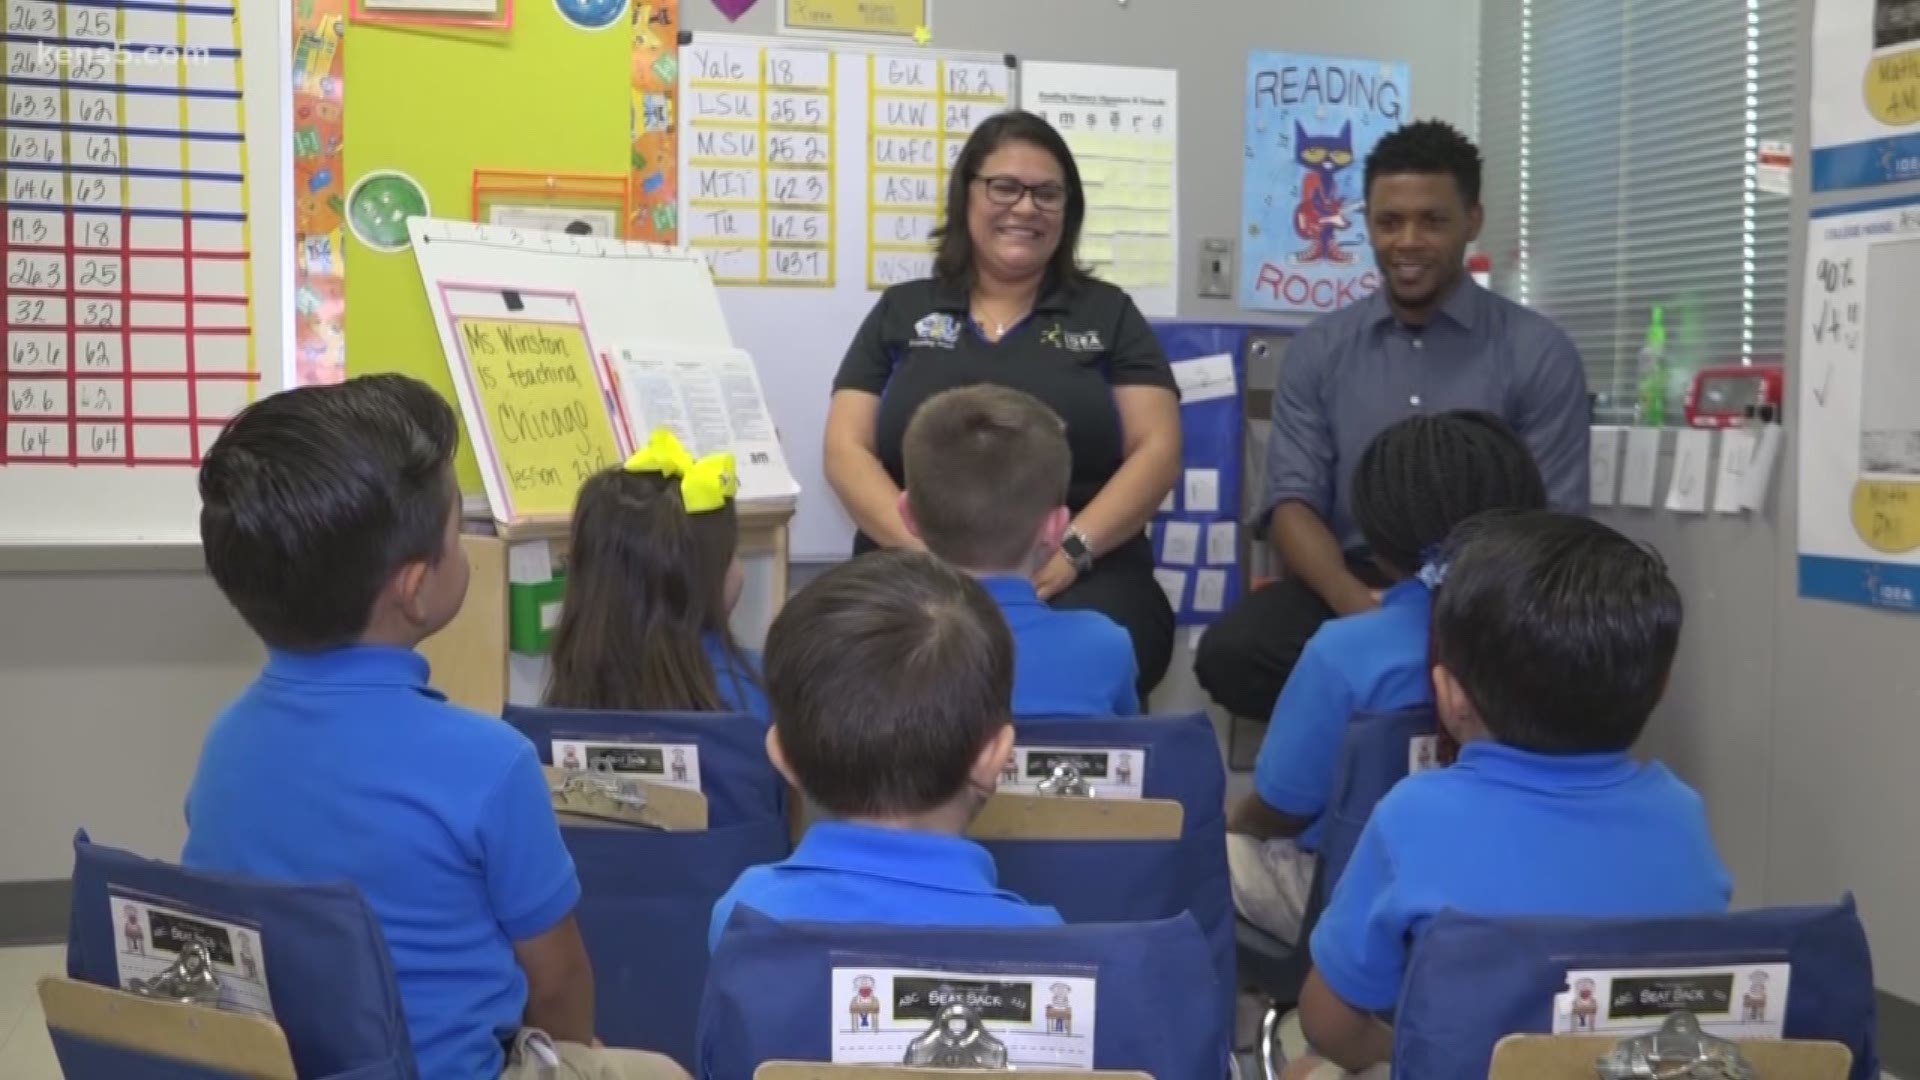 Today is Teacher Appreciation Day and students around the city are finding unique ways to celebrate their favorite educators. Eyewitness News reporter Jon Coker visited some local preschoolers to learn why they're so grateful for their teachers.